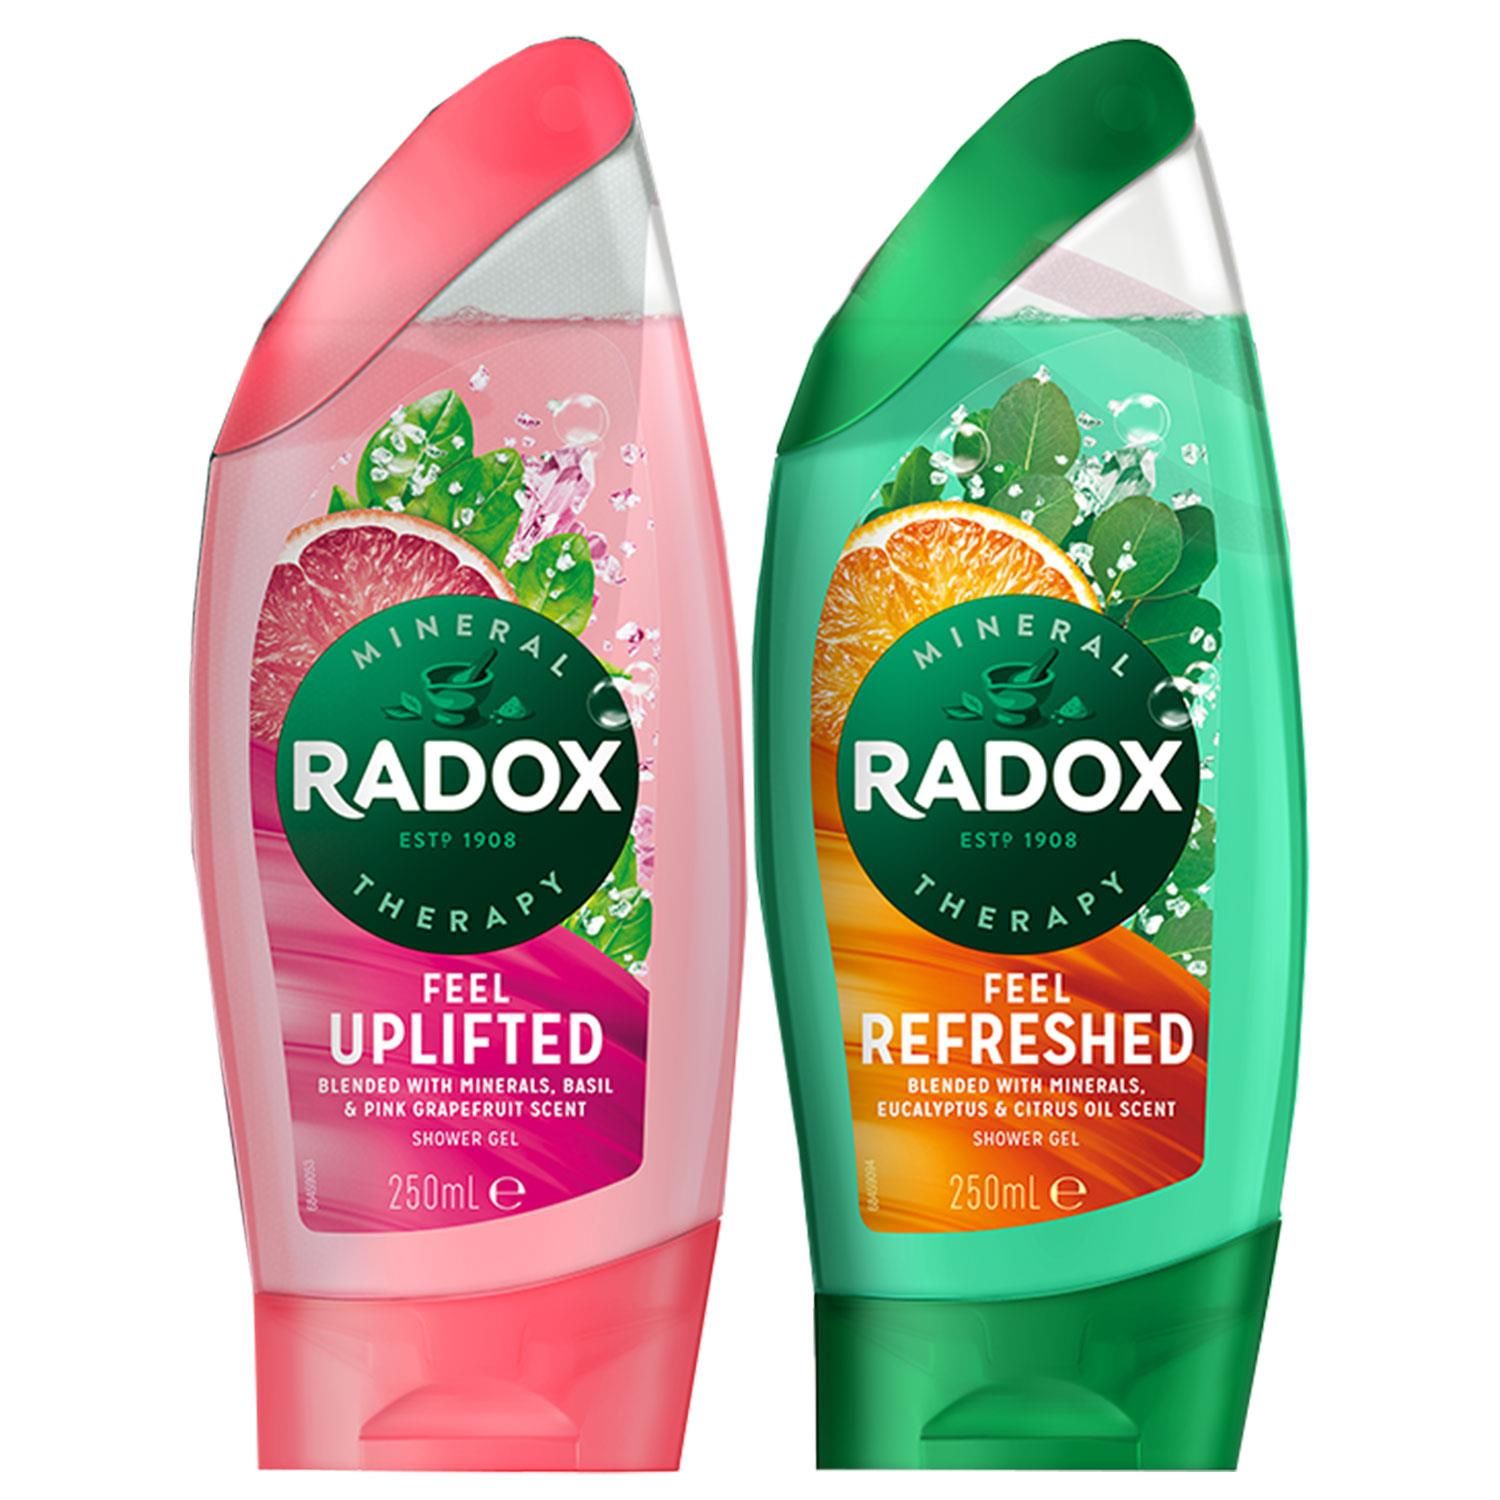 Radox Refreshing Wash Bag Gift Set Is it even Christmas if you haven't got your hands on a Radox Refreshing Gift Set It's a tradition. One that means we can start the day fresh and keep feeling fresh all day long. One that means you're not struggling to find last-minute Christmas gifts year after year. And you can't go wrong with Radox Refreshing WashBag Gift Set, made up of Feel Uplifted Shower Gel 250ml and Feel Refreshed Shower Gel 250 ml. There'll be no need to fake happiness when unwraps this gift set. Trust us. That's why we've created the ultimate gift set packaged in a classy but modern wash bag to make fresh-feeling self anywhere. Radox Feel Uplifted Shower Gel contains the heavenly scent of basil mixed with the citrusy tang of grapefruit to make you feel delightfully uplifted. Leaves your skin feeling refreshed and cleansed. A refreshing shower gel and cleanser. Radox Feel Refreshed Shower Gel transforms your mood and provides you with an invigorating shower experience when you need that energy boost to help you feel better. It contains natural ingredients chosen to help revitalize and invigorate your body and mind. 

Features: 
Full of natural herbs to provide the sensual stimulation you want, whether its relaxation, stimulation, muscle pain relief, Radox has the formulation for you. Combinations are specially designed to unleash a mood, whether you want to be ready or refreshed, uplifted or soothed. 
Radox Shower Gels are pH neutral and dermatologically tested. 
Suitable for all skin types. 

Safety Warnings: Avoid contact with eyes. In case of contact, rinse thoroughly with water. The product contains menthol. If you experience discomfort, please stop use. 

Gift Set Includes: 1x Feel Uplifted Shower Gel 250ml 1x Feel Refreshed Shower Gel 250 ml 1x Waterproof Lining WashBag